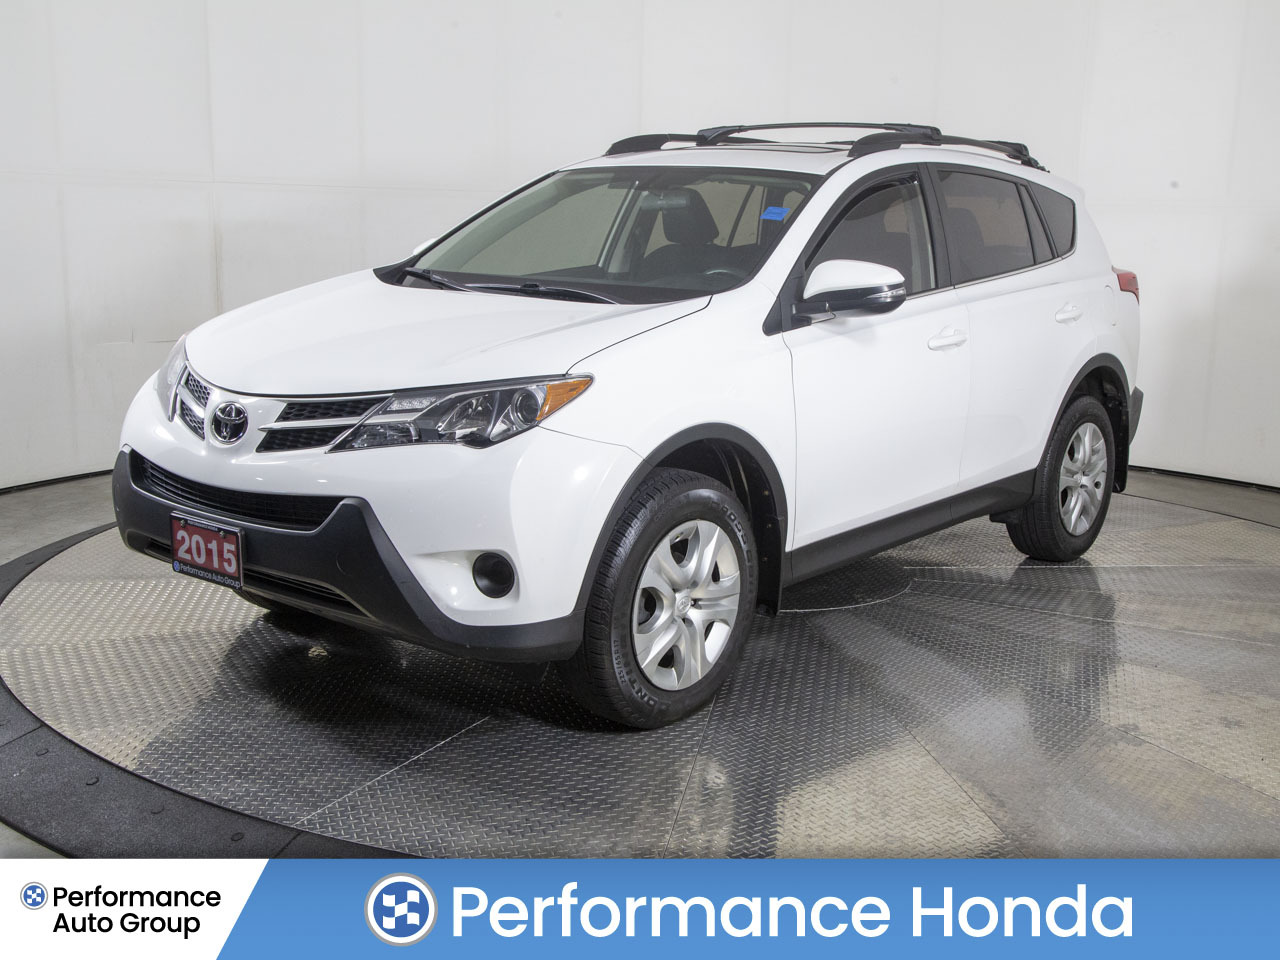 2015 Toyota RAV4 AWD 4dr LE | LOW KM | ONE OWNER |